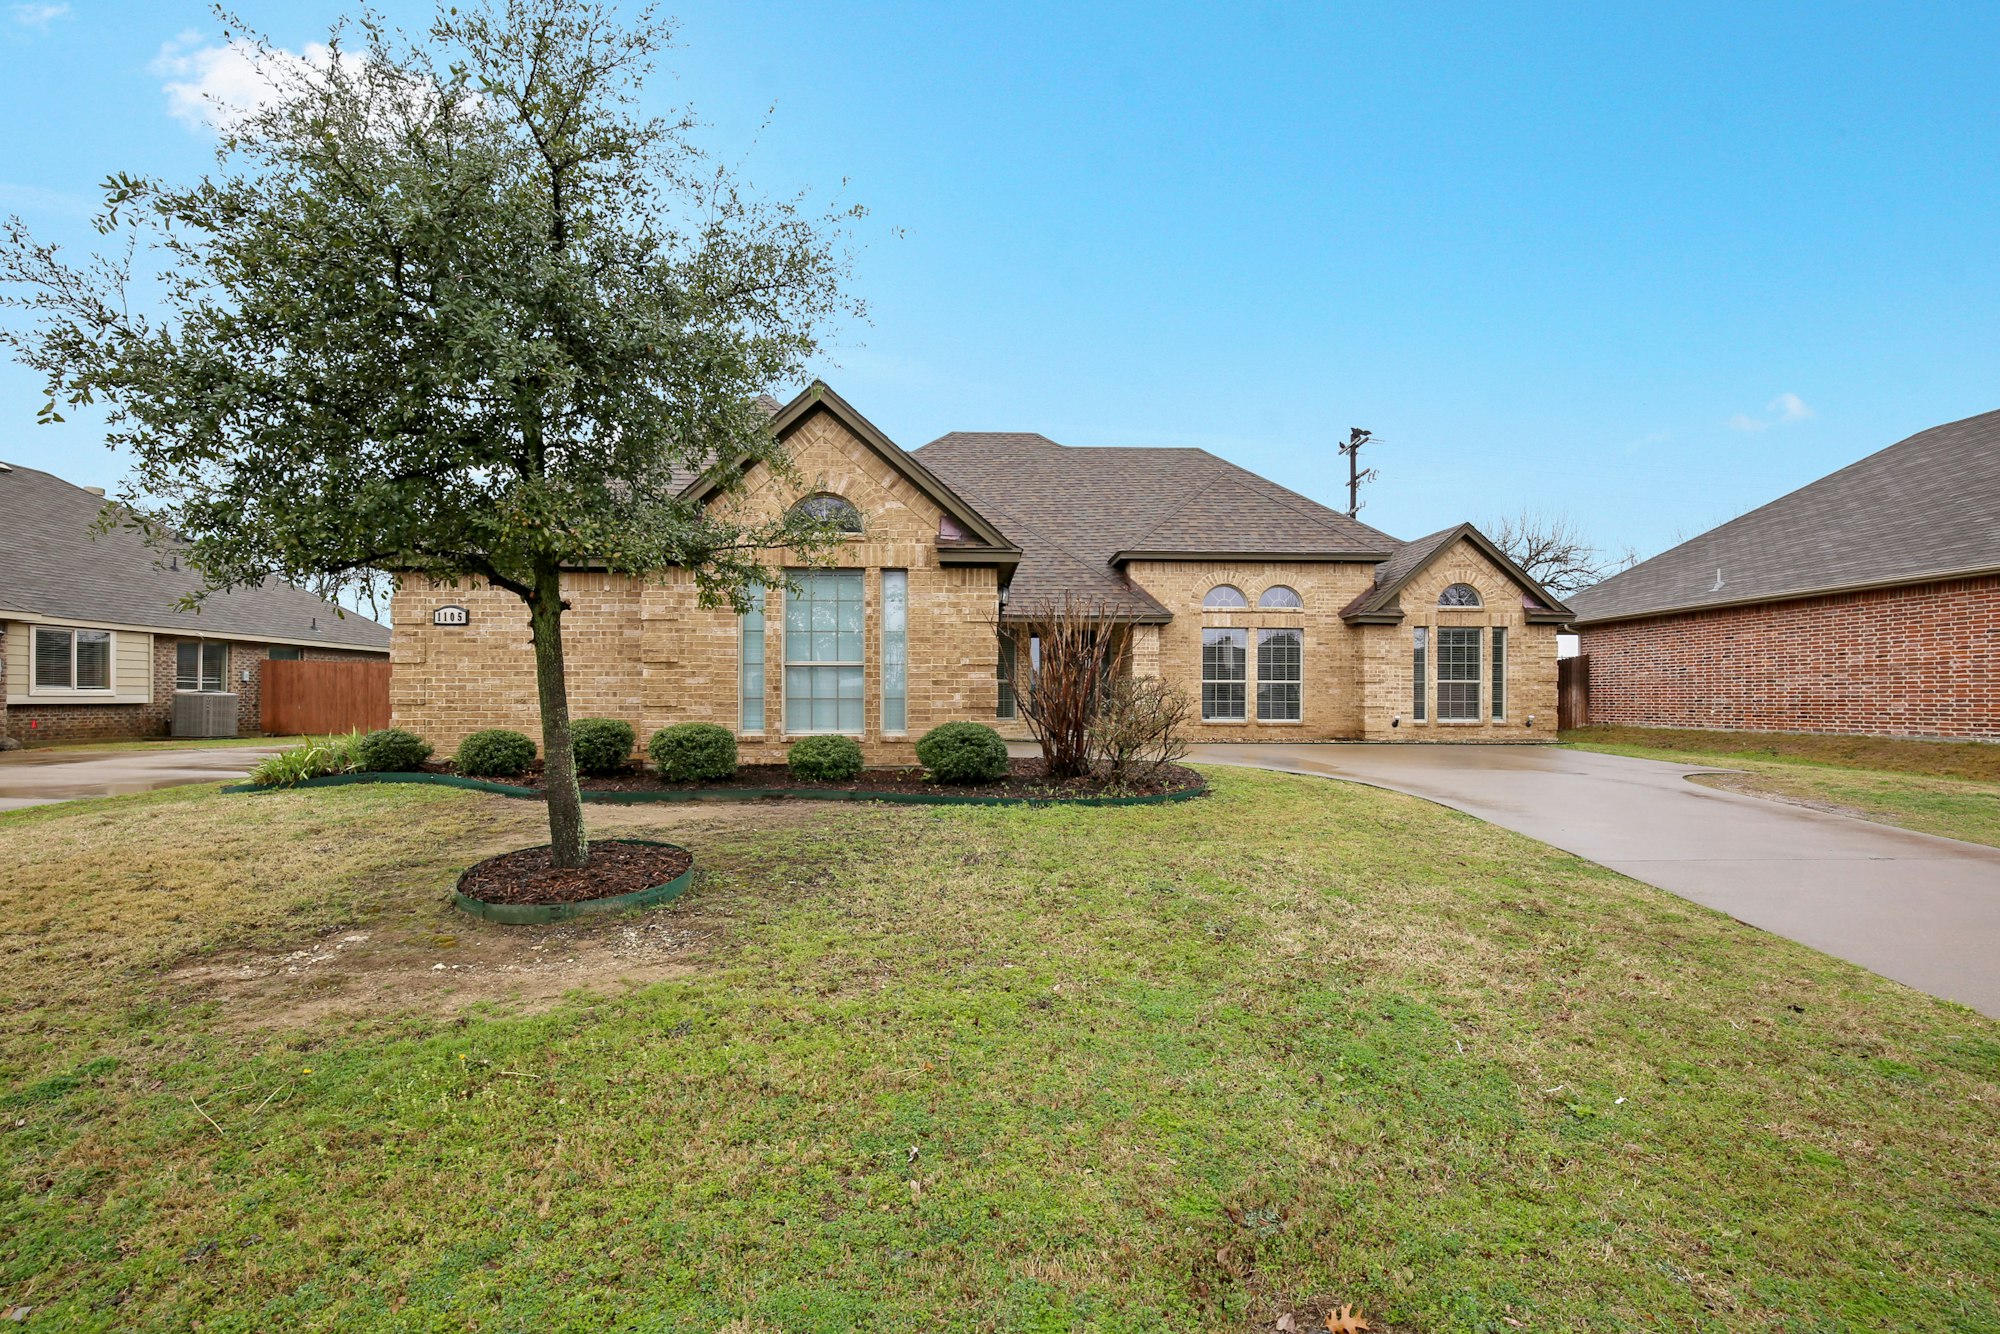 Photo 1 of 25 - 1105 Willow Crest Dr, Midlothian, TX 76065